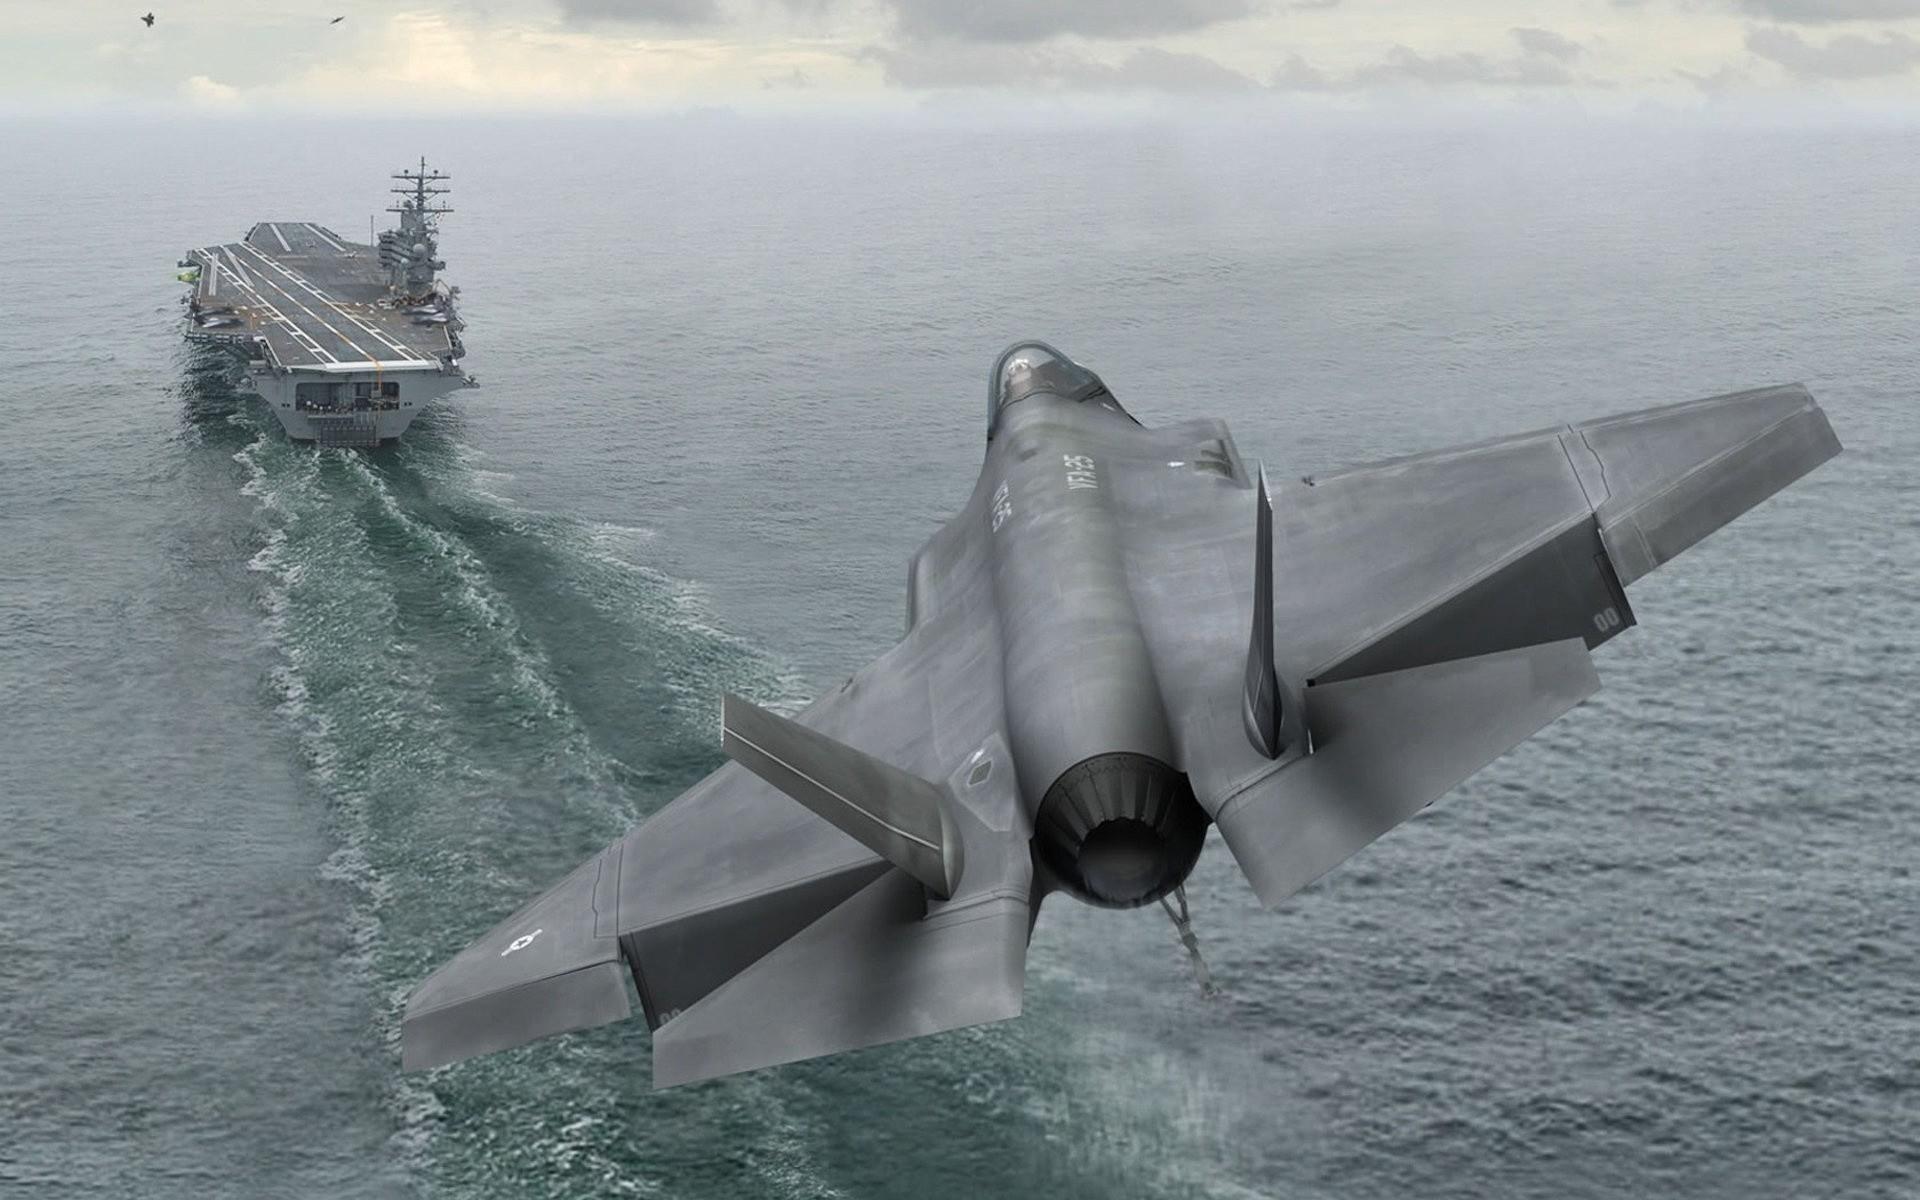 F 35 Wallpaper background picture